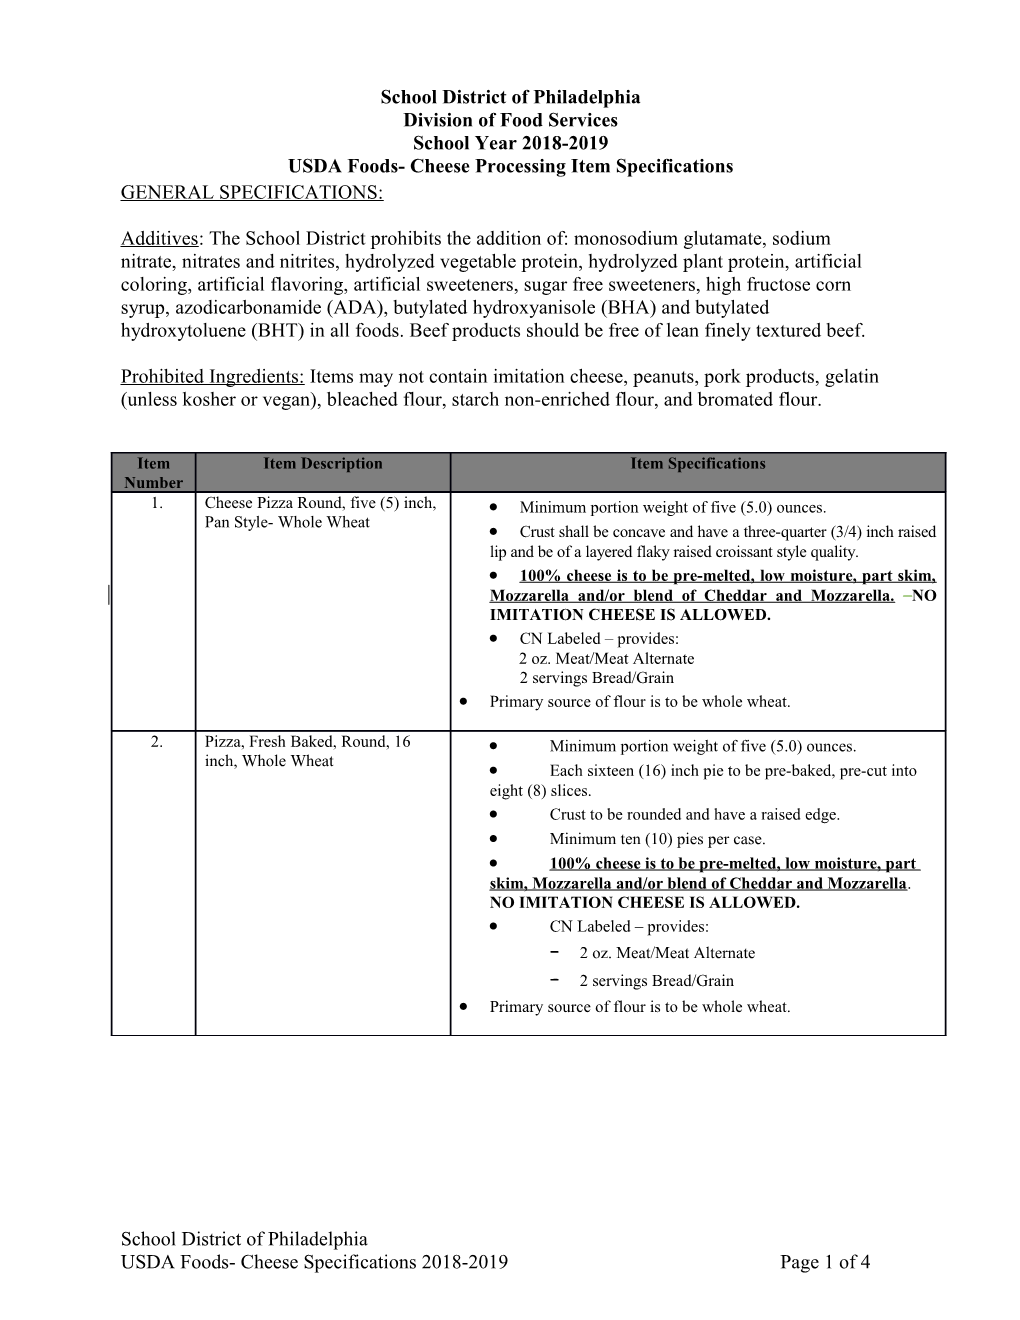 USDA Foods-Cheese Processing Item Specifications